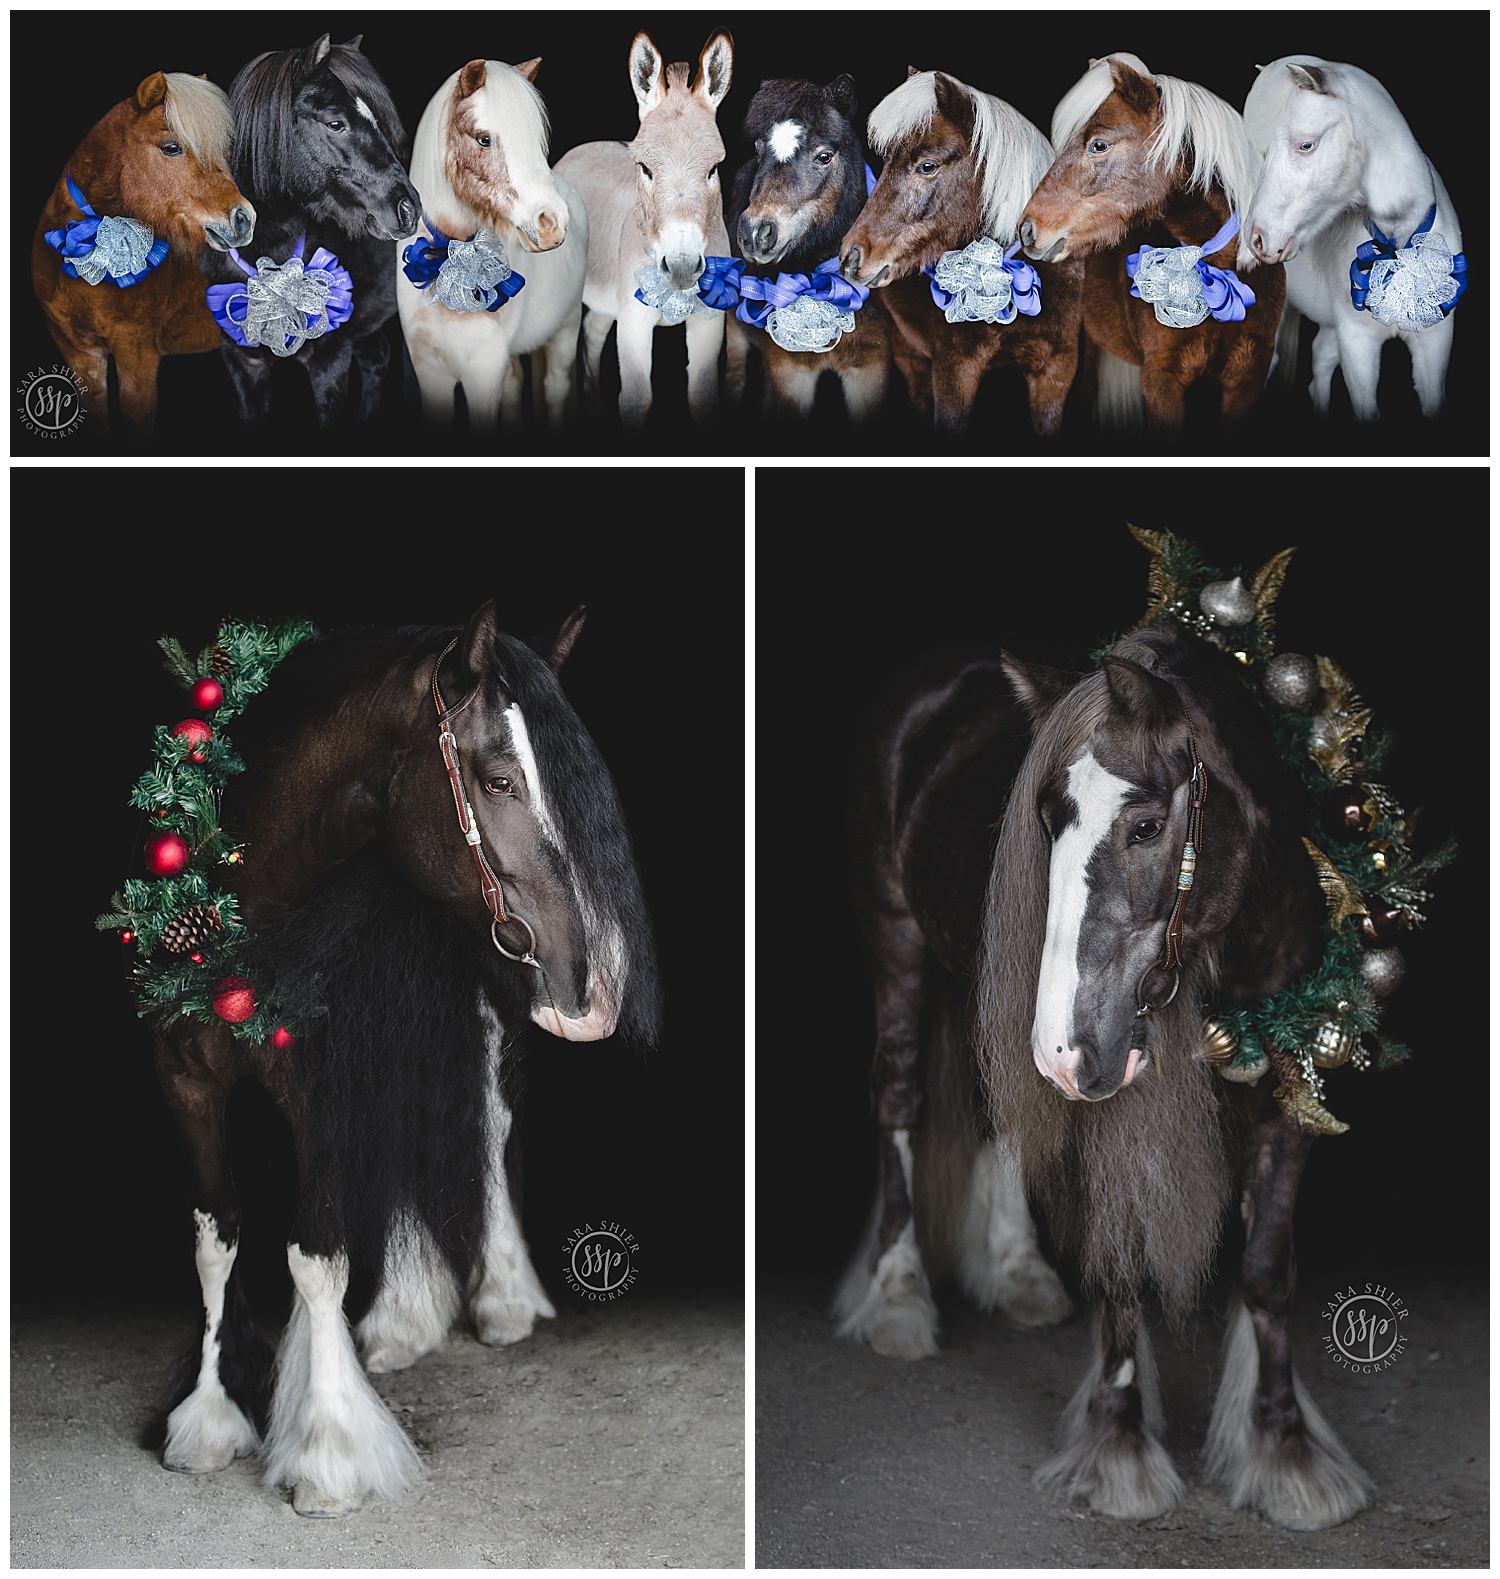 Merry Christmas From The Ponies Of Ssp Sara Shier